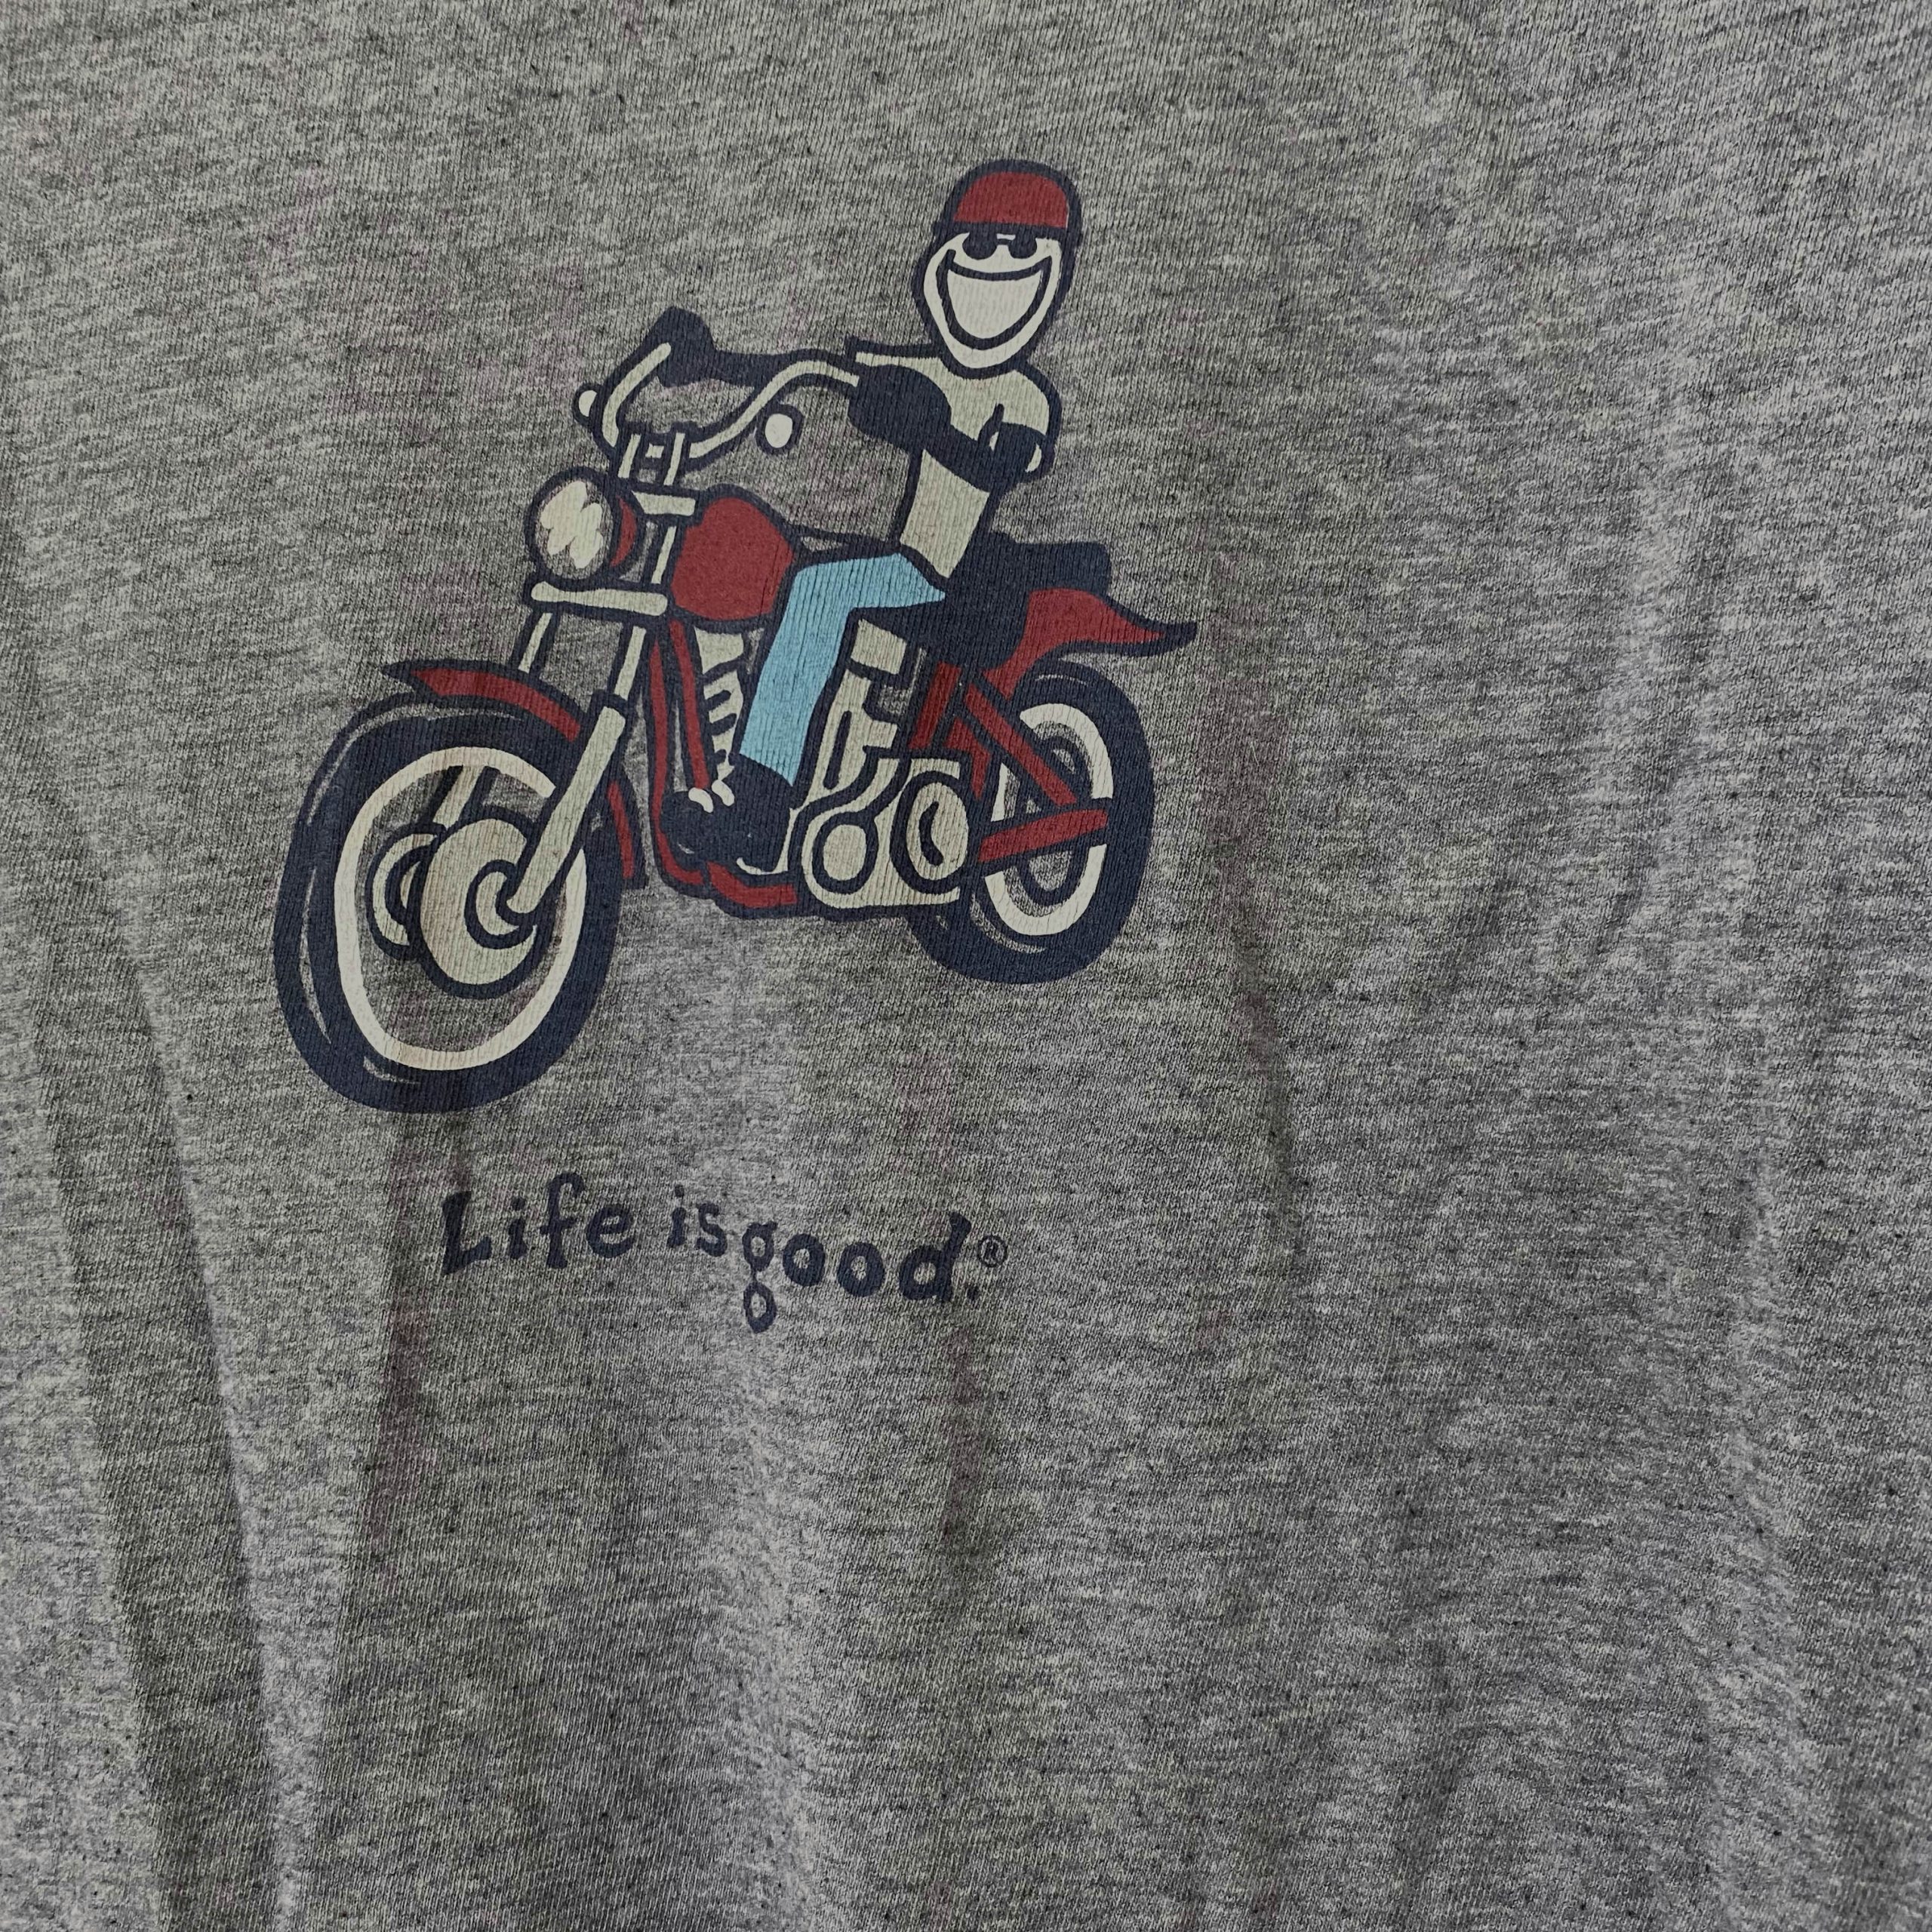 Life is Good Vintage t-shirt - Happy cool dude cruising on Harley (?) motocycle. Approximately 28" long, 49" chest